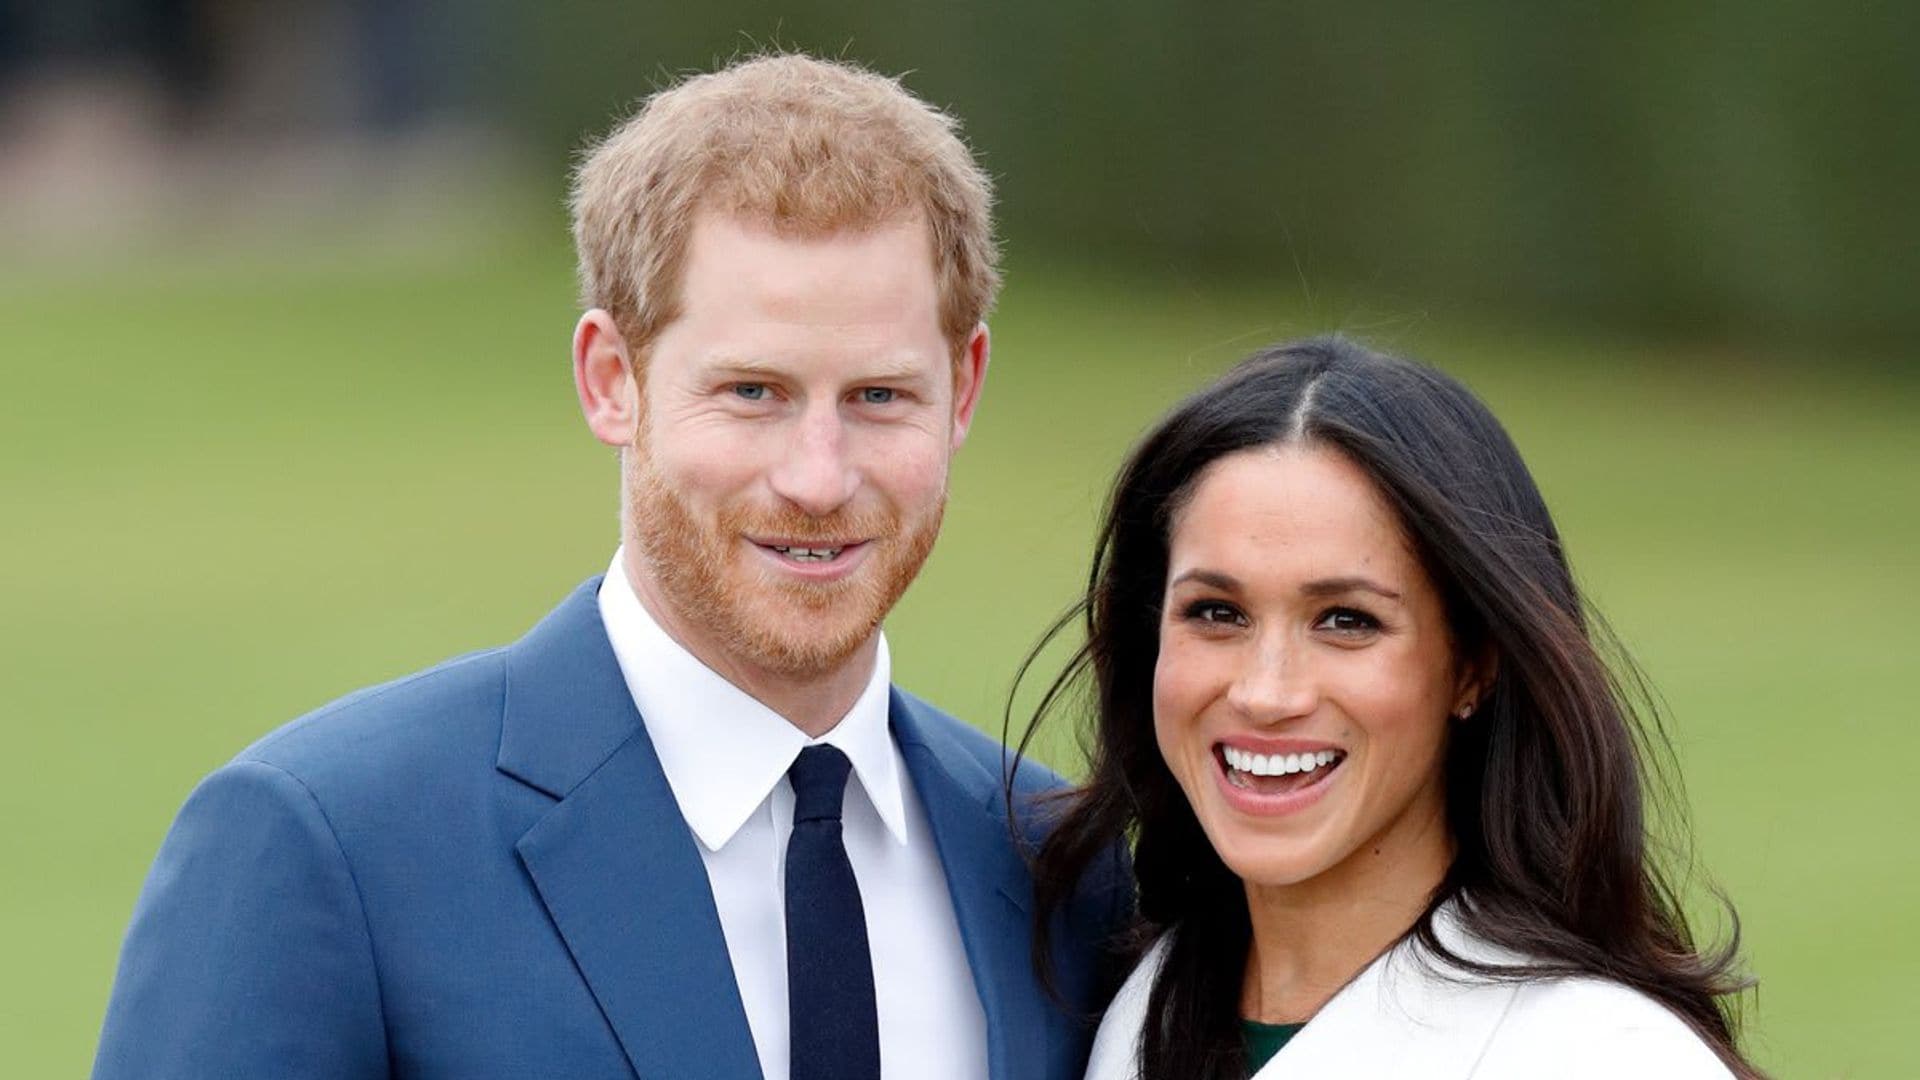 Prince Harry and Meghan Markle, parents of Lilibet Diana Mountbatten-Windsor